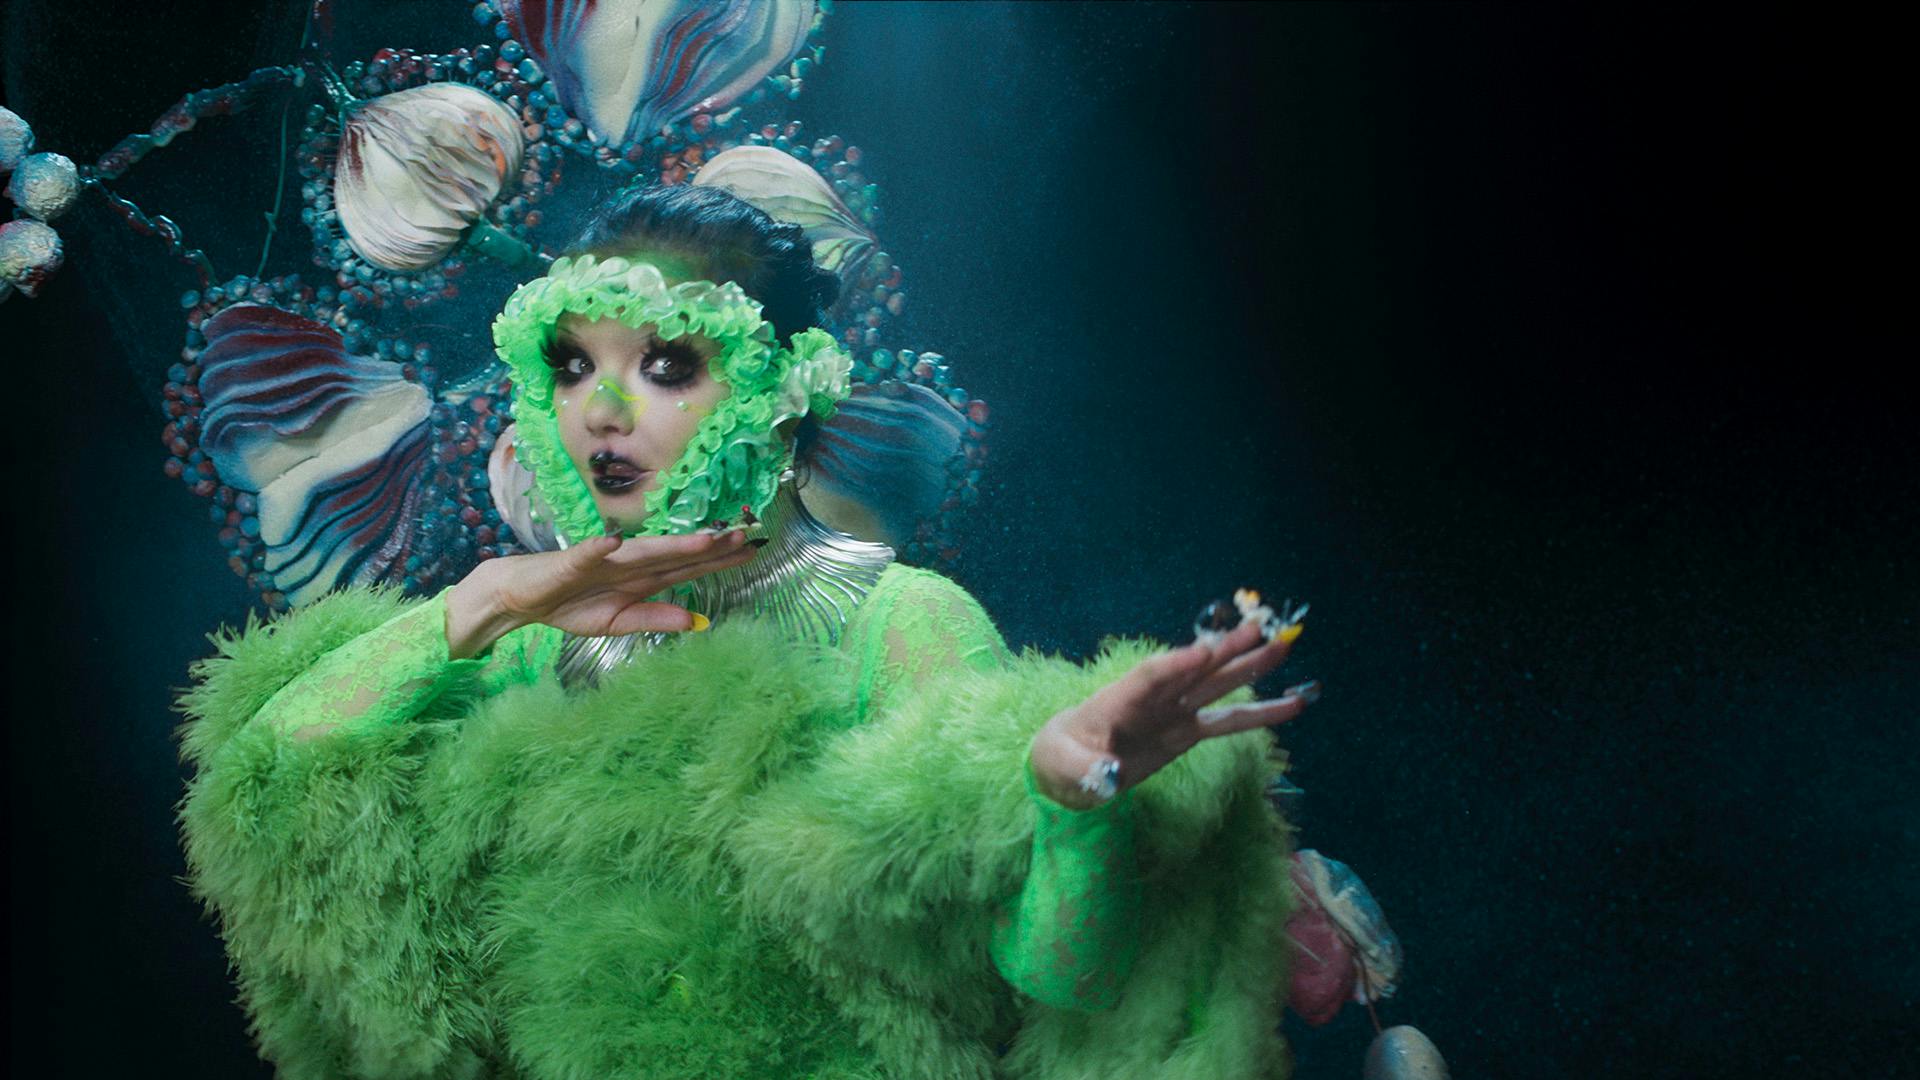 Still image of Bjork wearing a green dress and headwrap from the music video for Atopos by Bjork directed by Vidar Logi